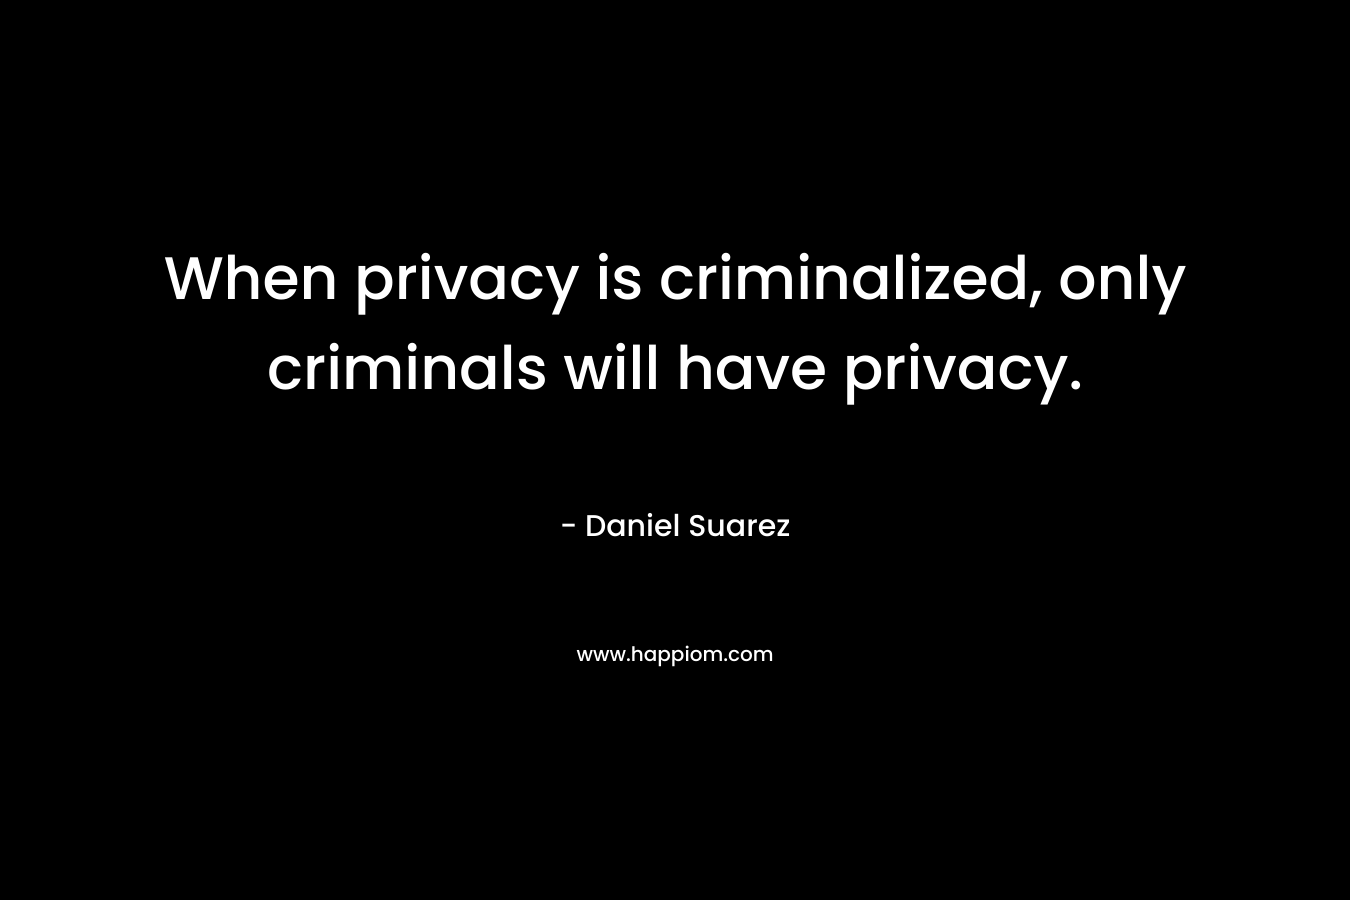 When privacy is criminalized, only criminals will have privacy. – Daniel Suarez